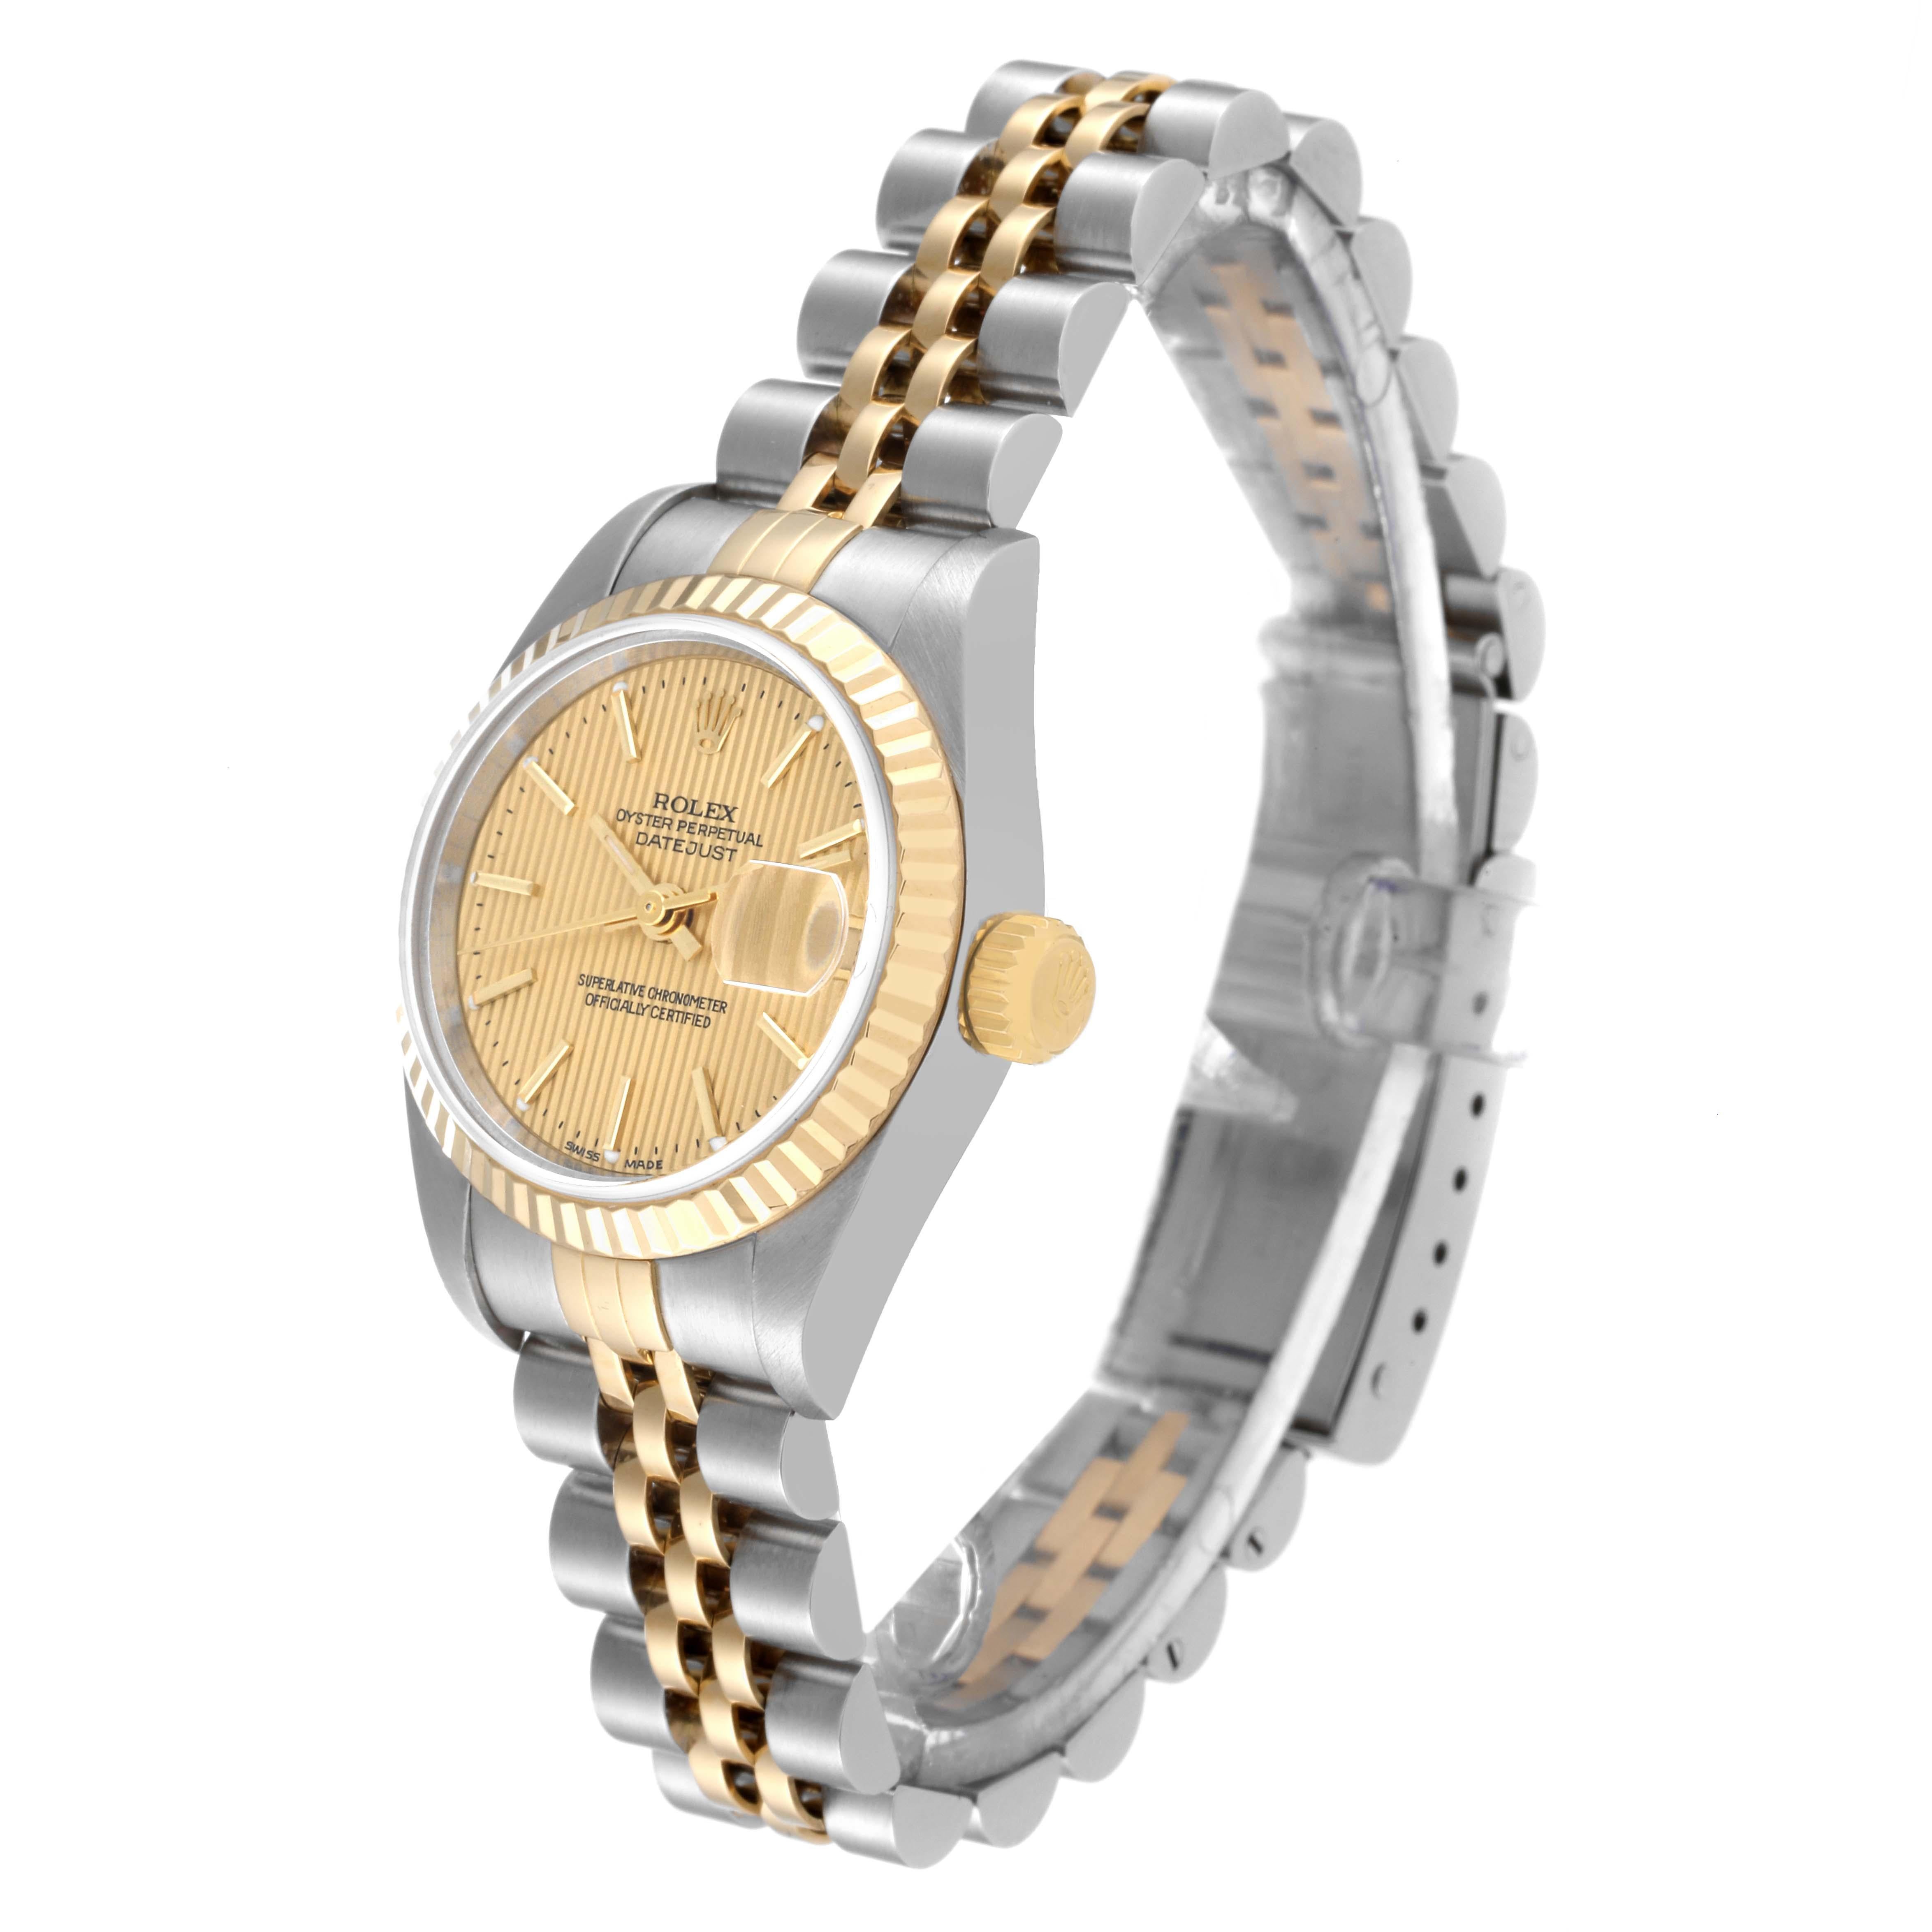 Women's Rolex Datejust Steel Yellow Gold Tapestry Dial Ladies Watch 79173 Box Papers